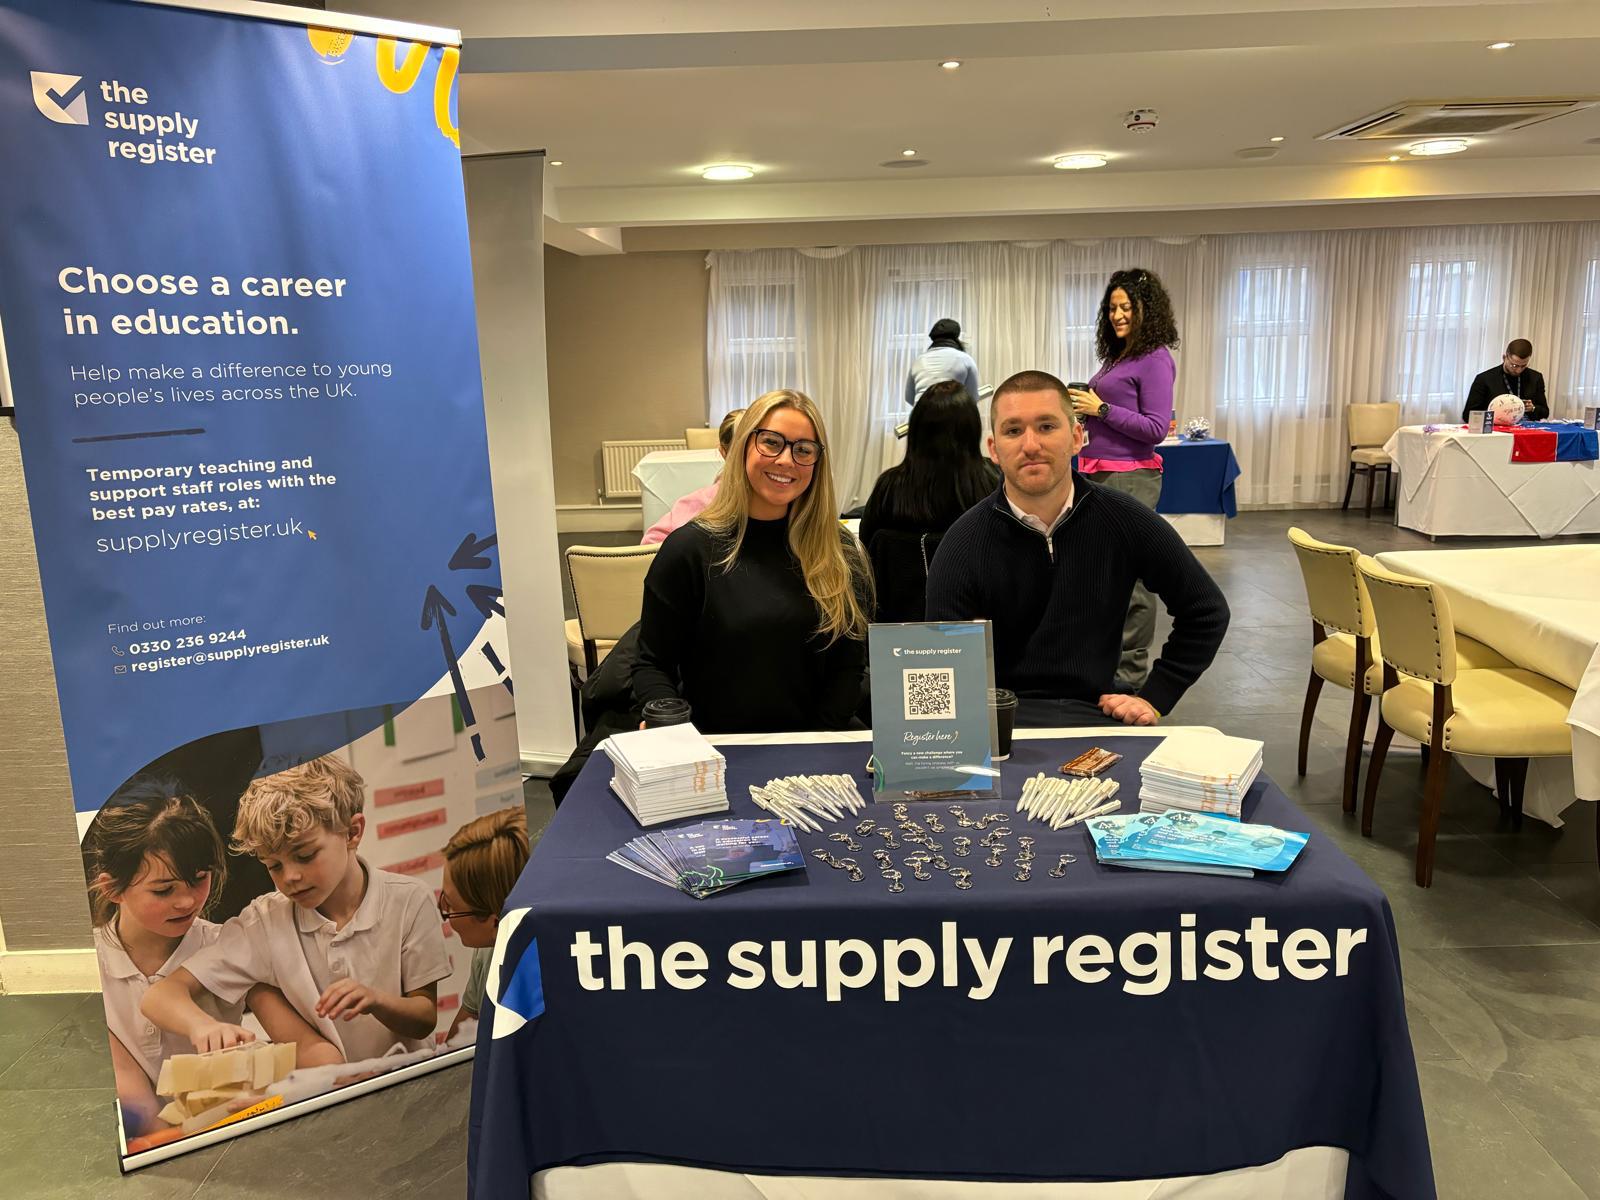 The Supply Register at our event in South London